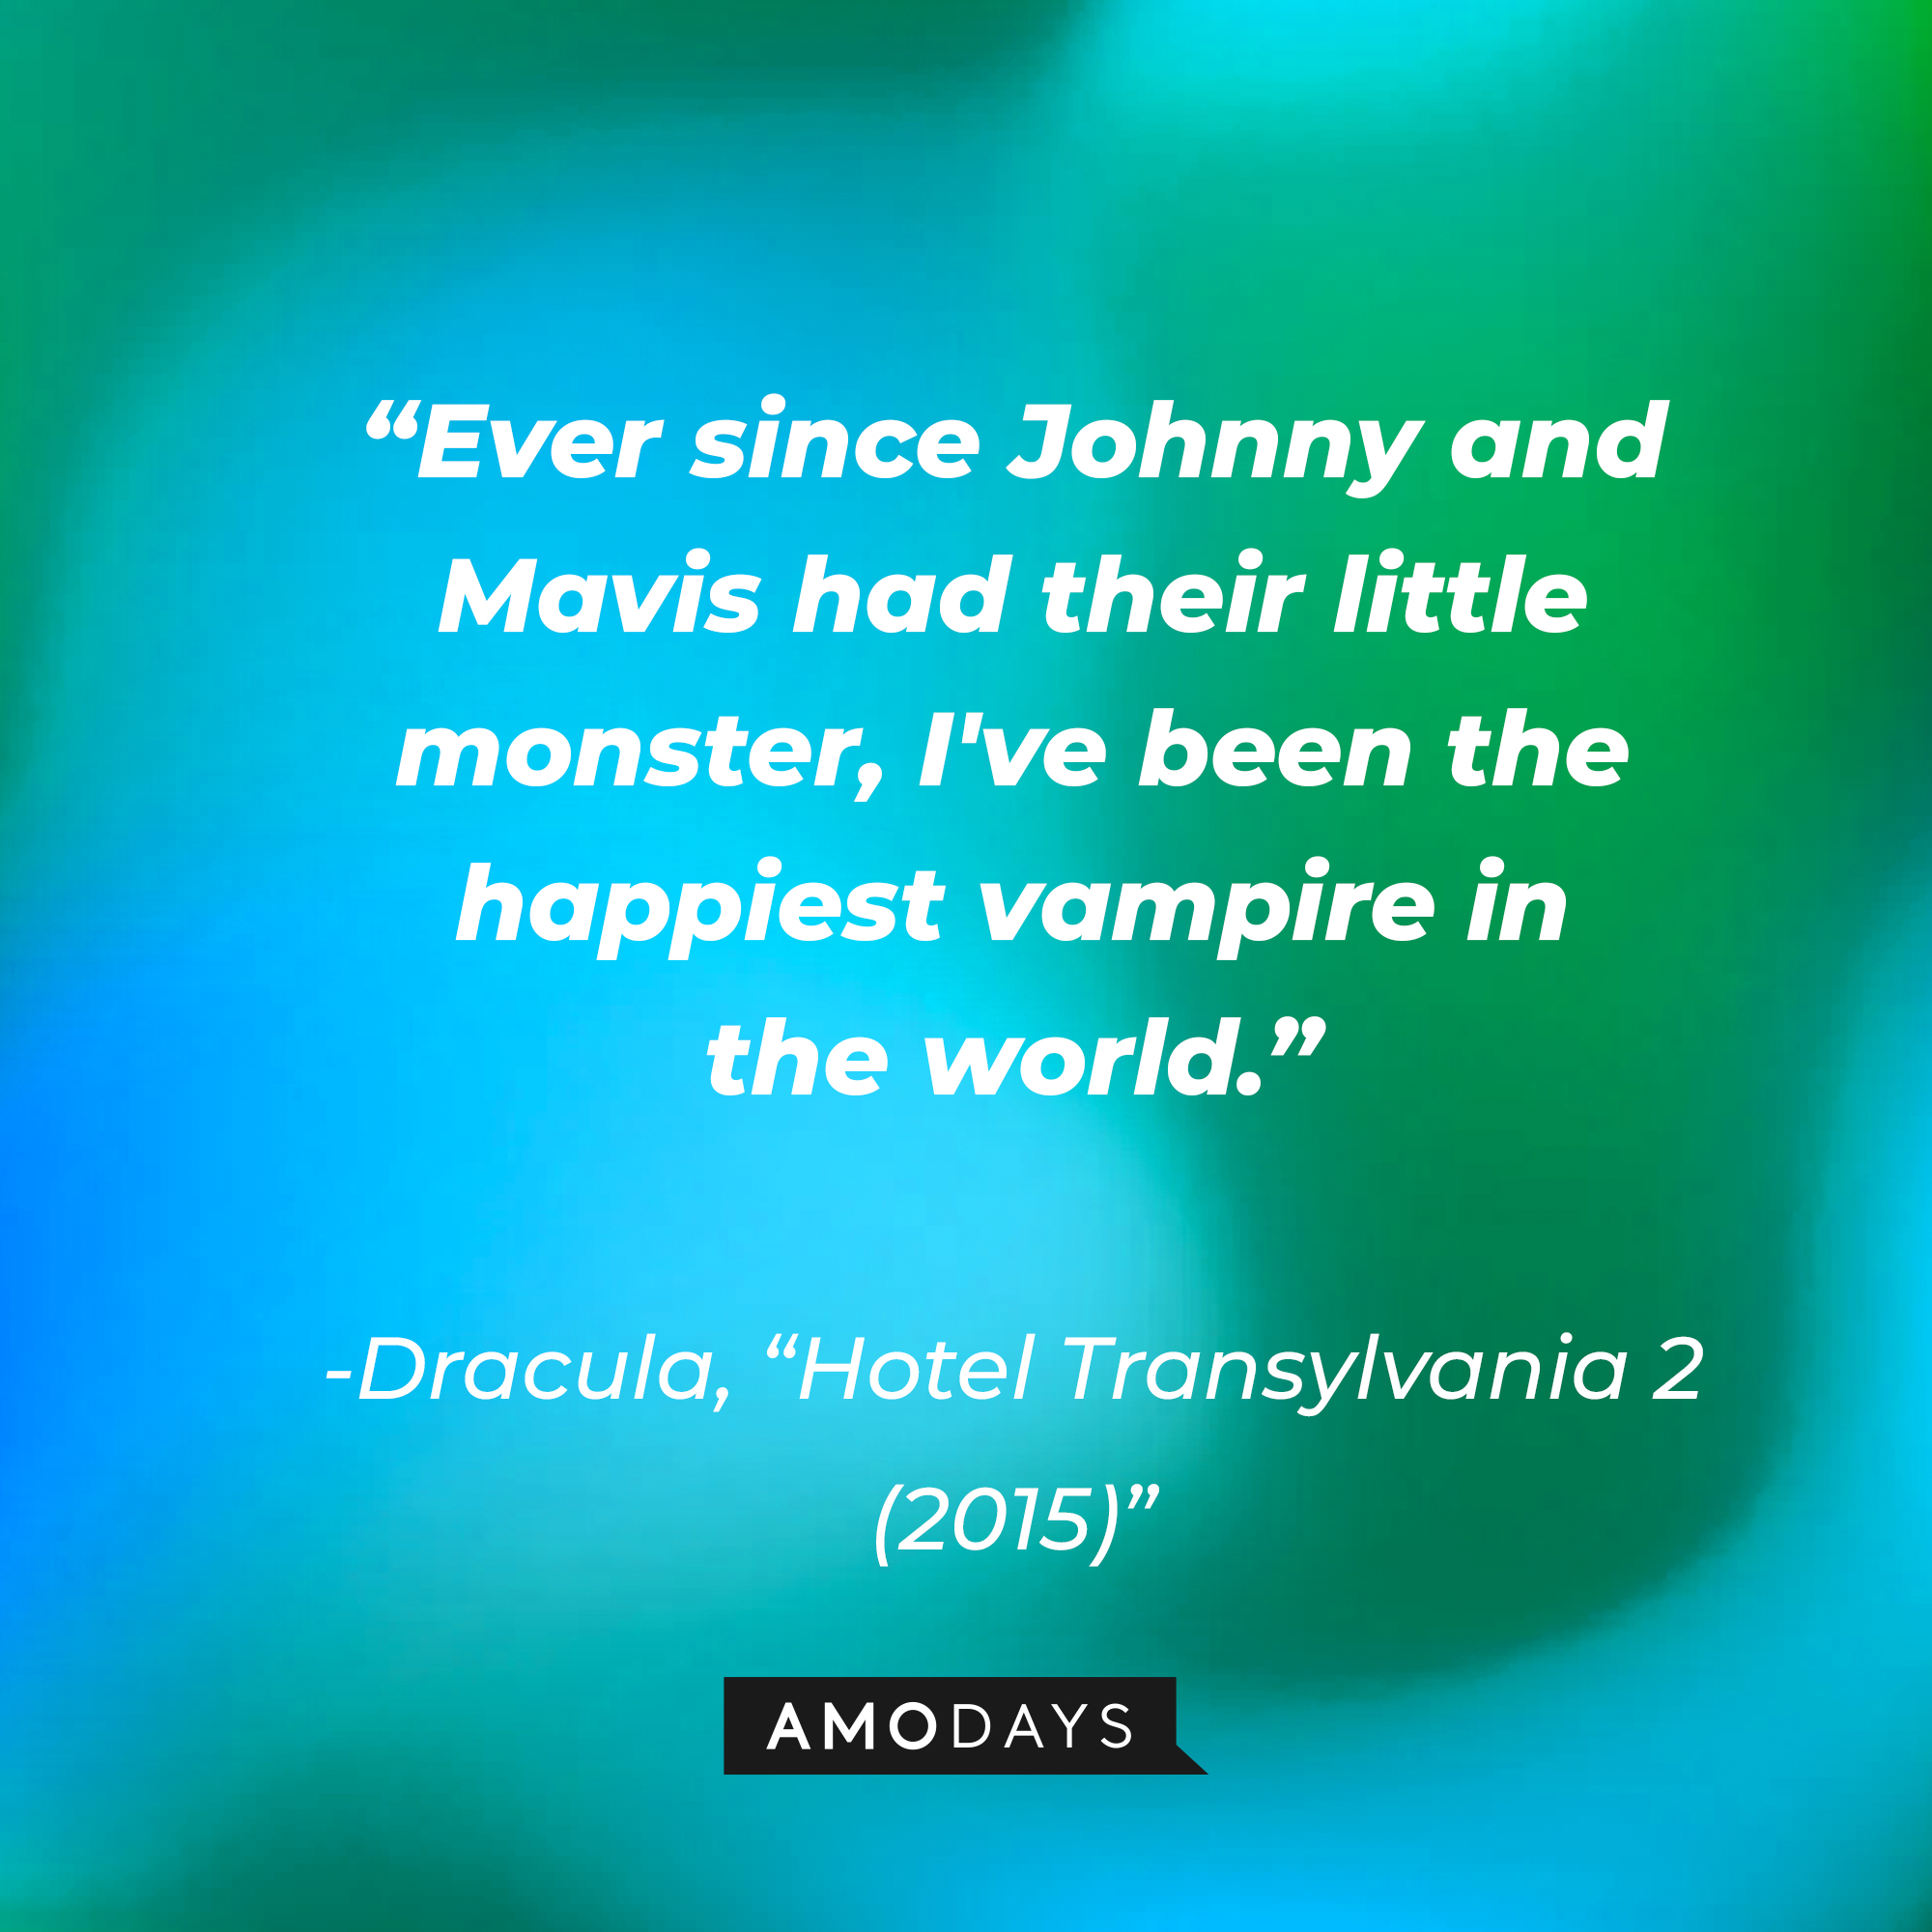 Dracula's quote: “Ever since Johnny and Mavis had their little monster, I've been the happiest vampire in the world.” | Source: Amodays